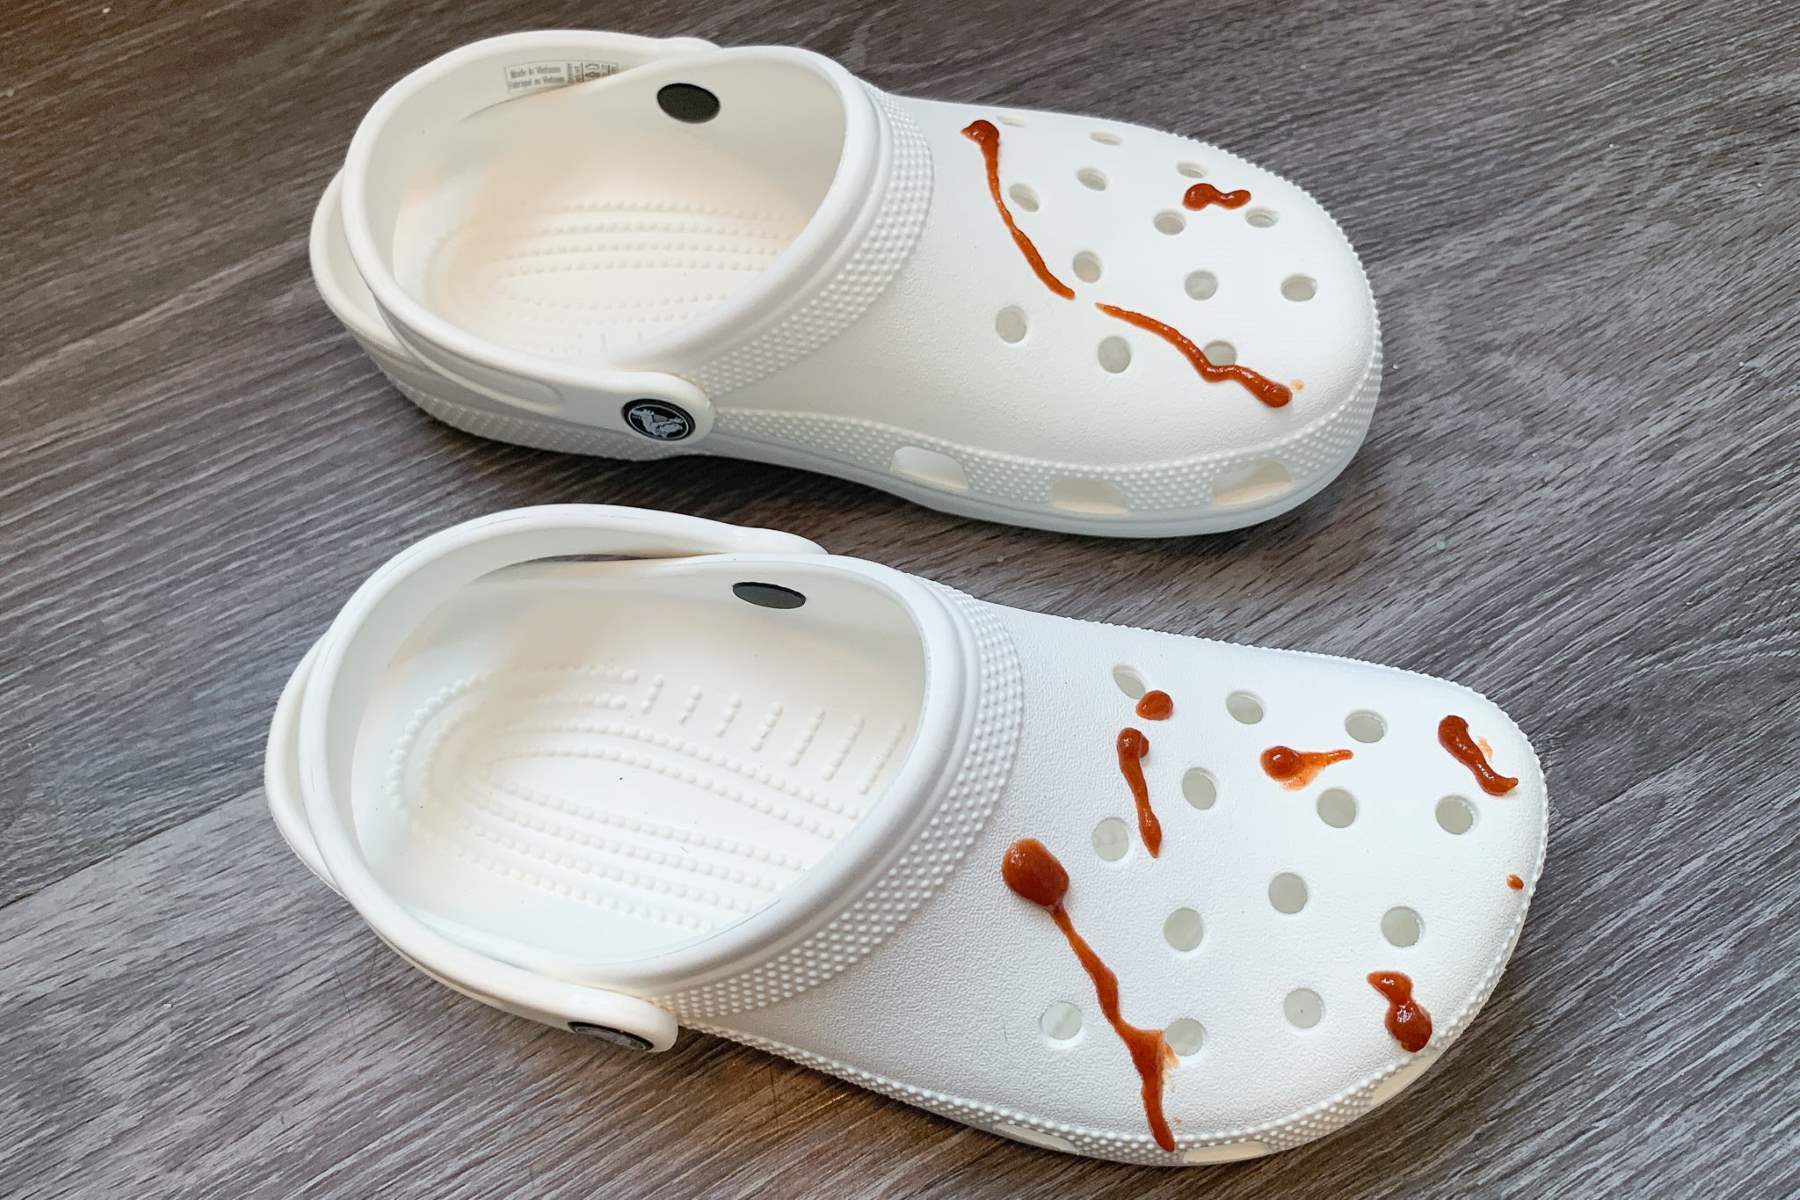 The Ultimate Hack To Eliminate Odor From Your Crocs